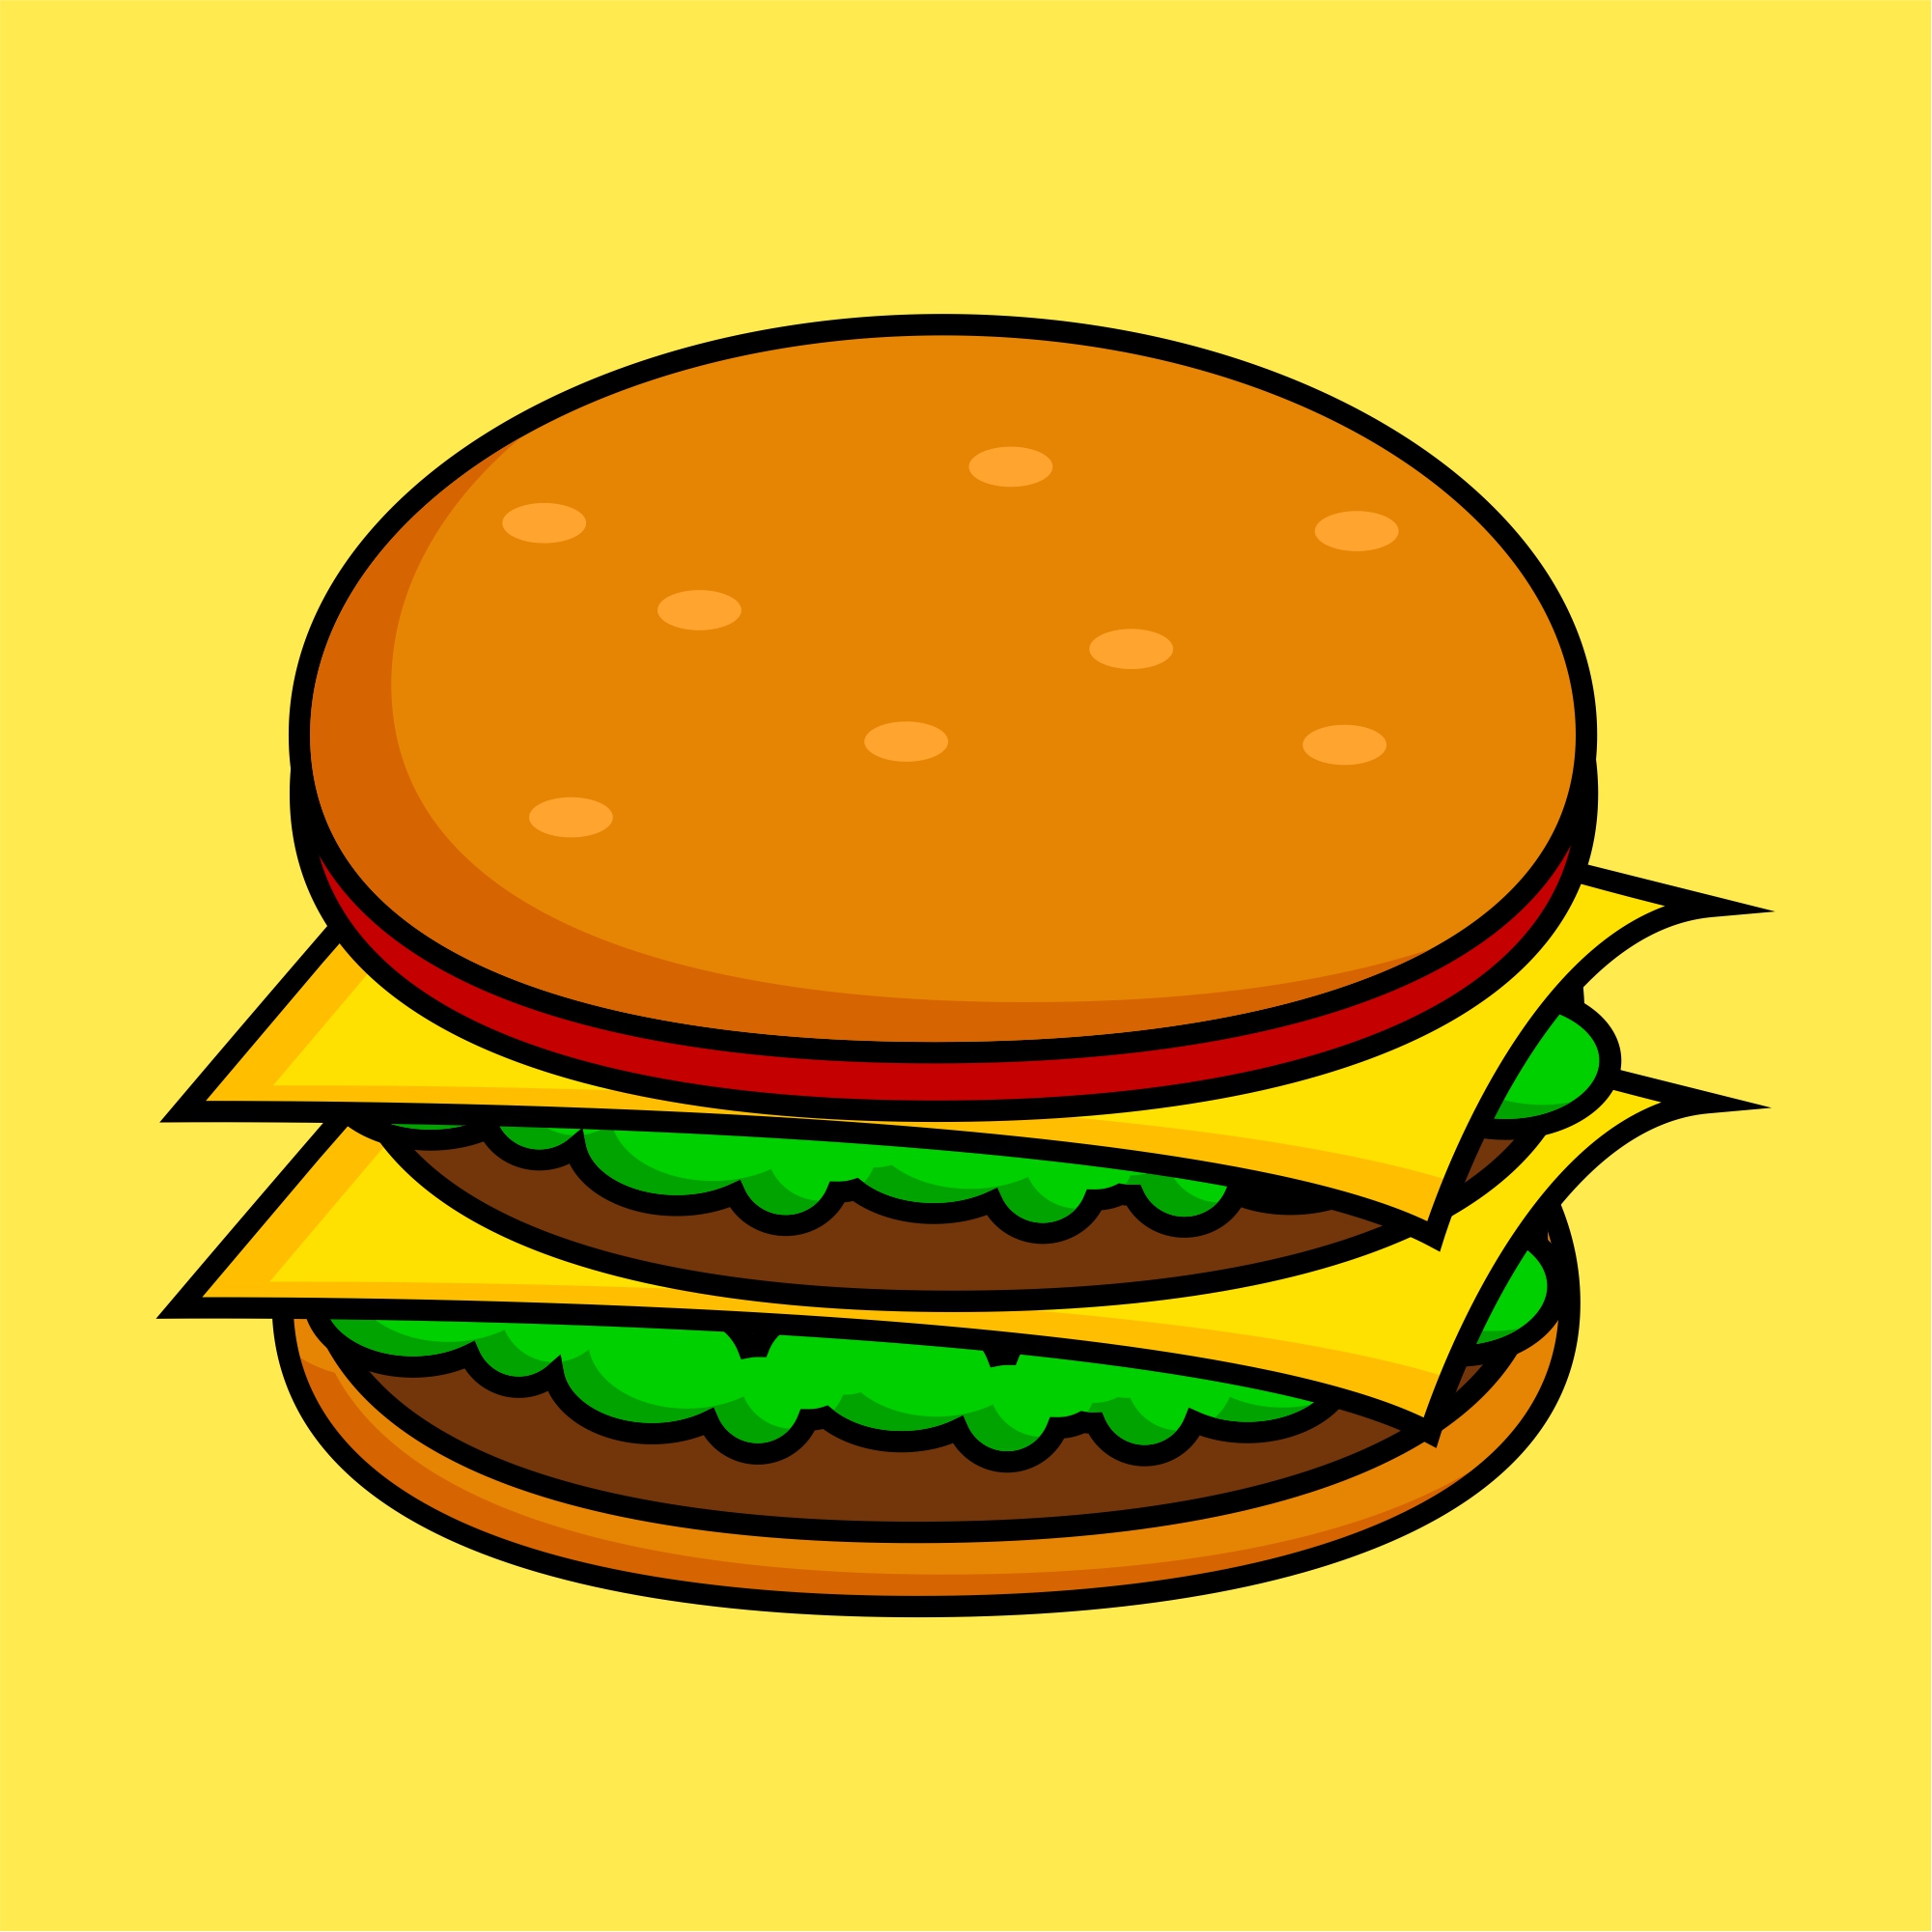 Colorful illustration of burger with yellow background.